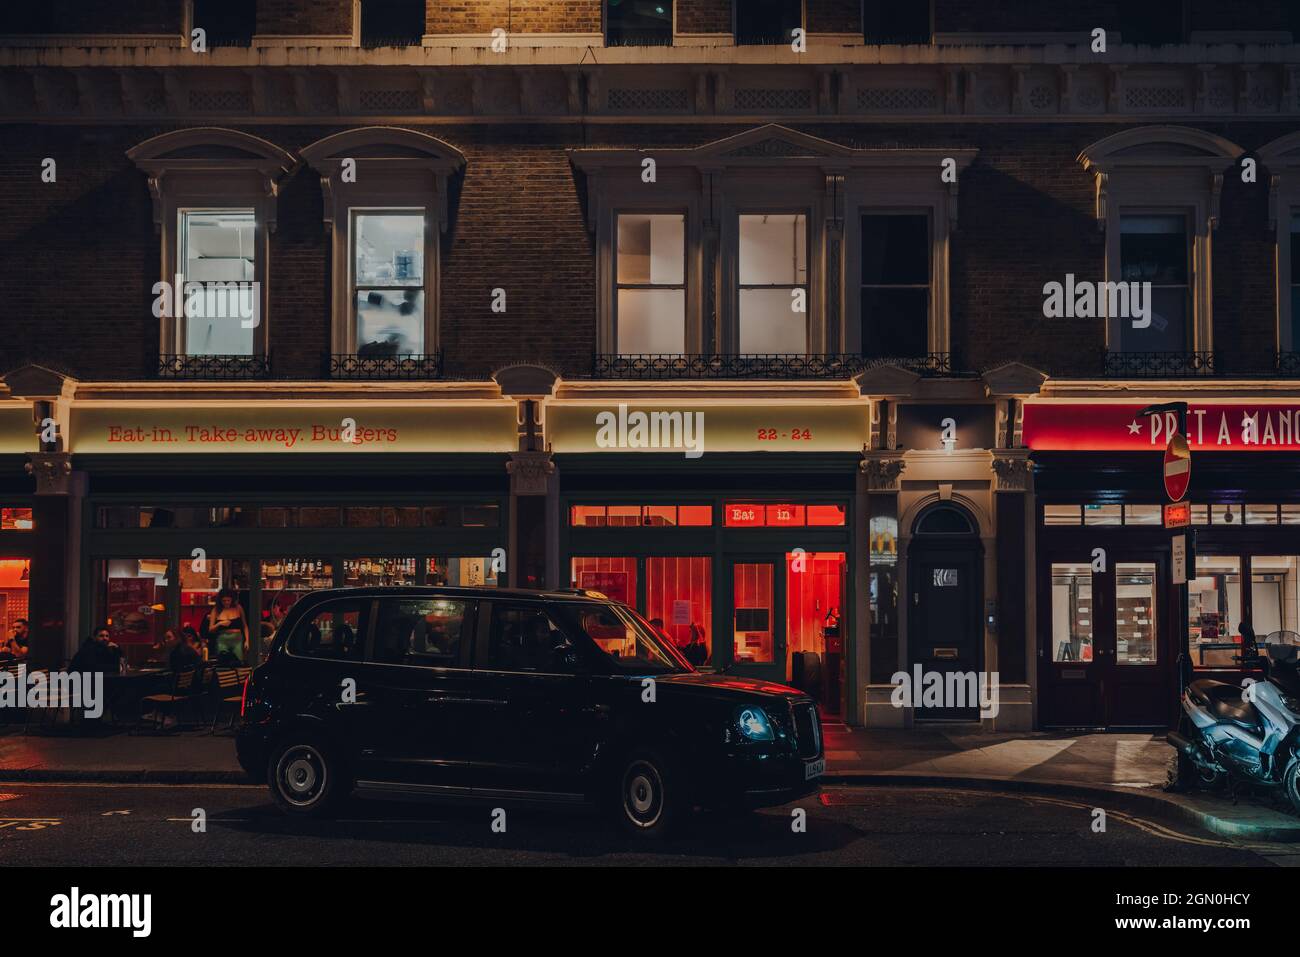 London, UK - September 03, 2021: Modern black cab with illuminated sign in front a restaurants on a street in London, UK. London taxis are an importan Stock Photo